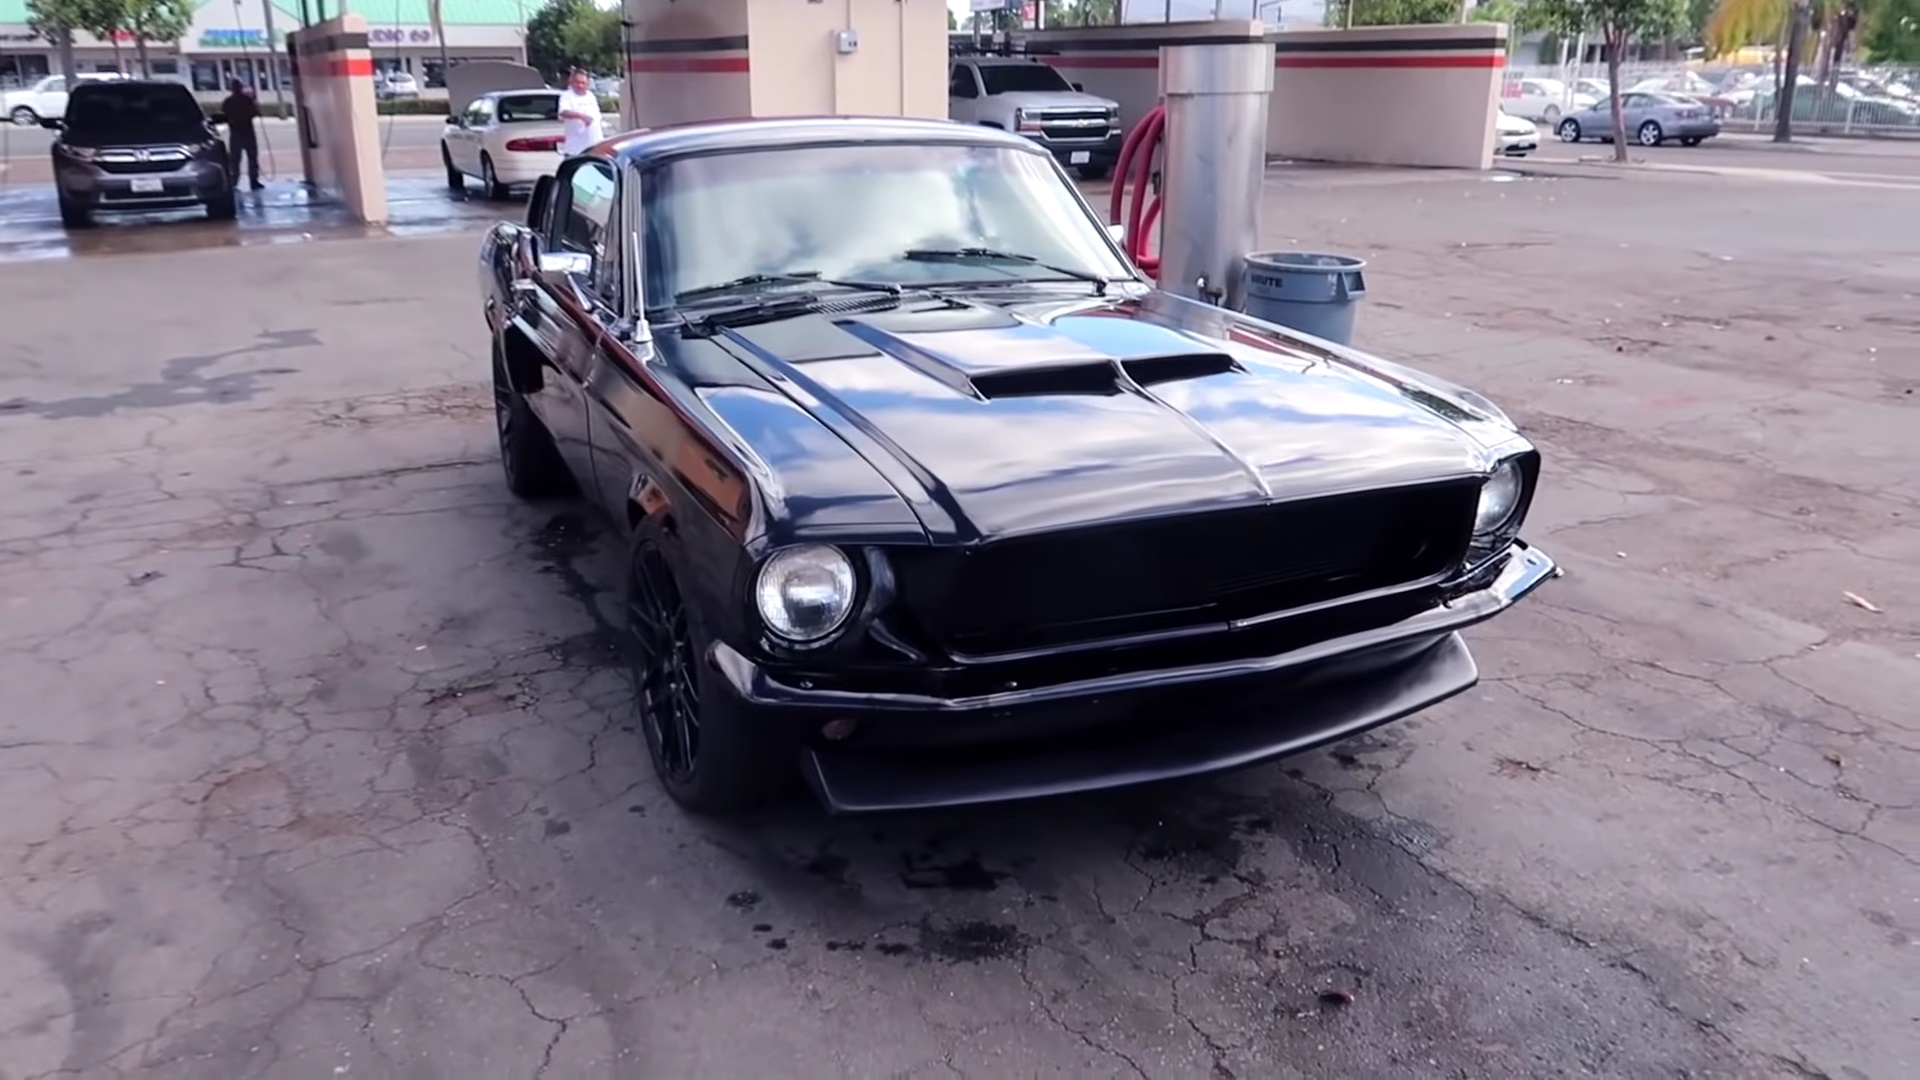 What It's Like To Drive A 1968 Ford Mustang Fastback